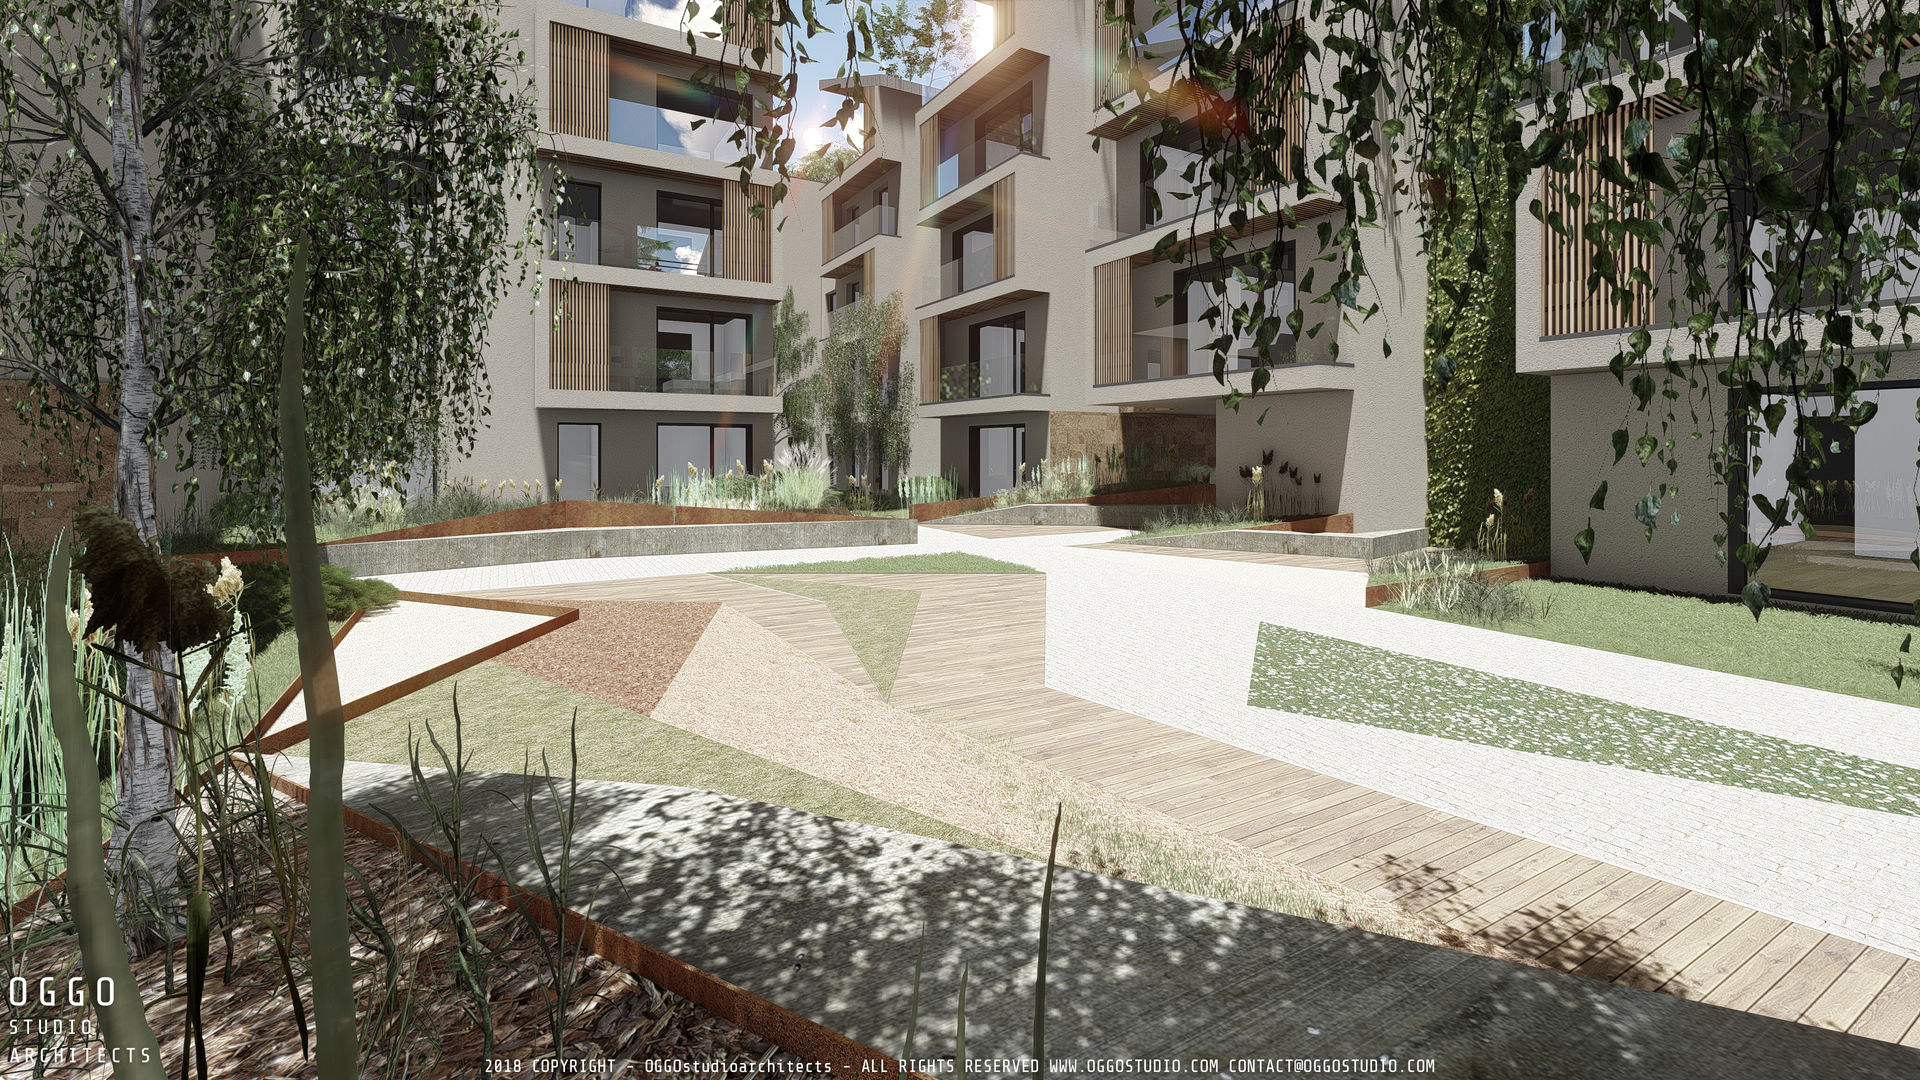 Housing project of 120 apartments OGGOstudioarchitects, unipessoal lda حديقة Romainville,Collective housing,square,green,wood